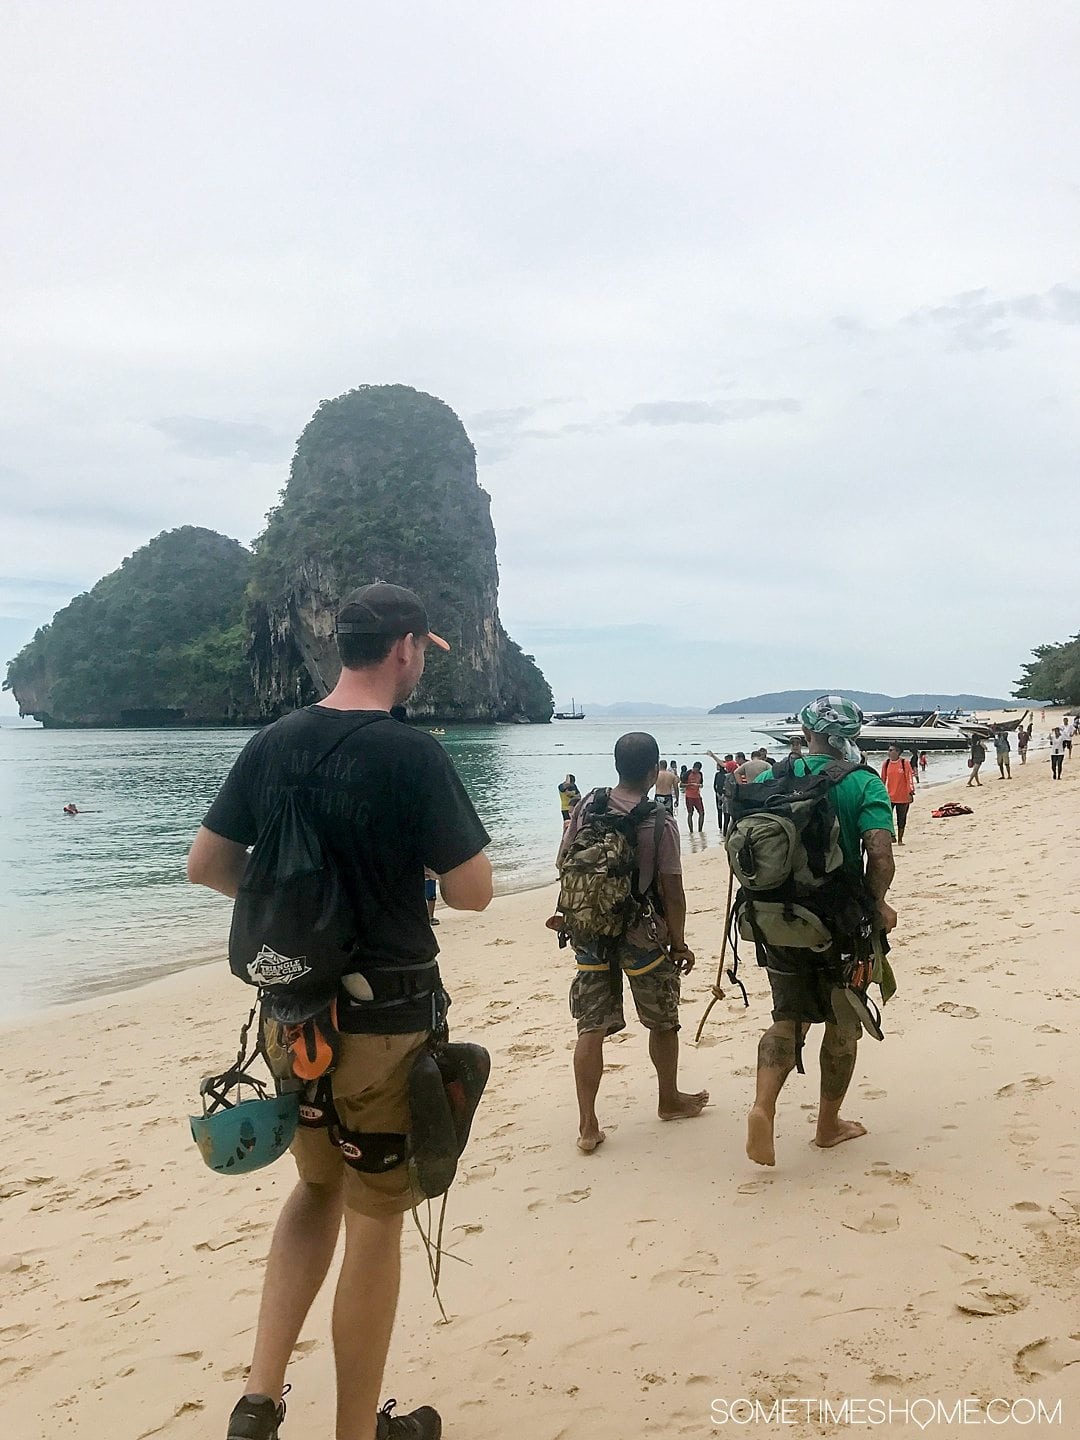 The BEST excursion we did in Thailand was a day rock climbing Phuket with an amazing guide. Our destinations were Krabi and Railay Beach on our day trip itinerary. Our adventure between the islands was a wonderful thing to do on a mid-size budget. Learn about our cost (for solo and couples) and see photography and more on Sometimes Home. #ThailandTravel #PhuketThailand #RailayBeach #KrabiBeach #RockClimbing #ThailandRockClimbing #ThingstodoinPhuket #ThaiBeaches #SoutheastAsiaTrip #RockClimbingThailand